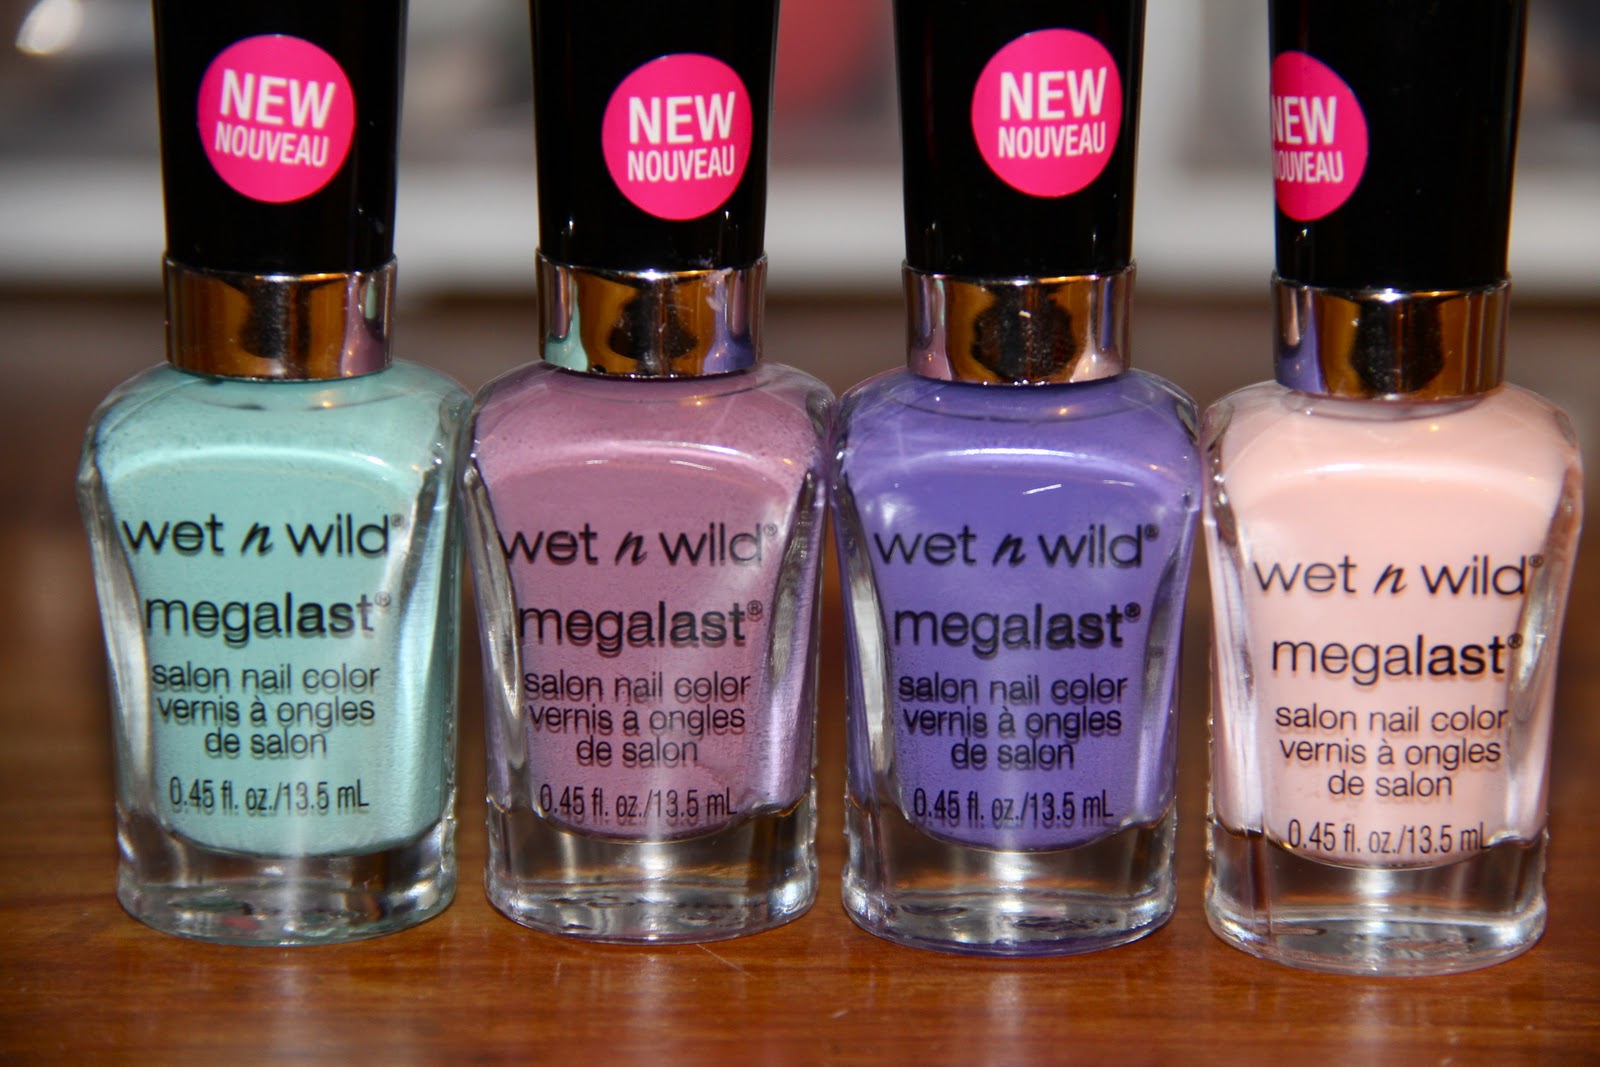 Wet n Wild Megalast Nail Polish in "I Moss Have It" - wide 5